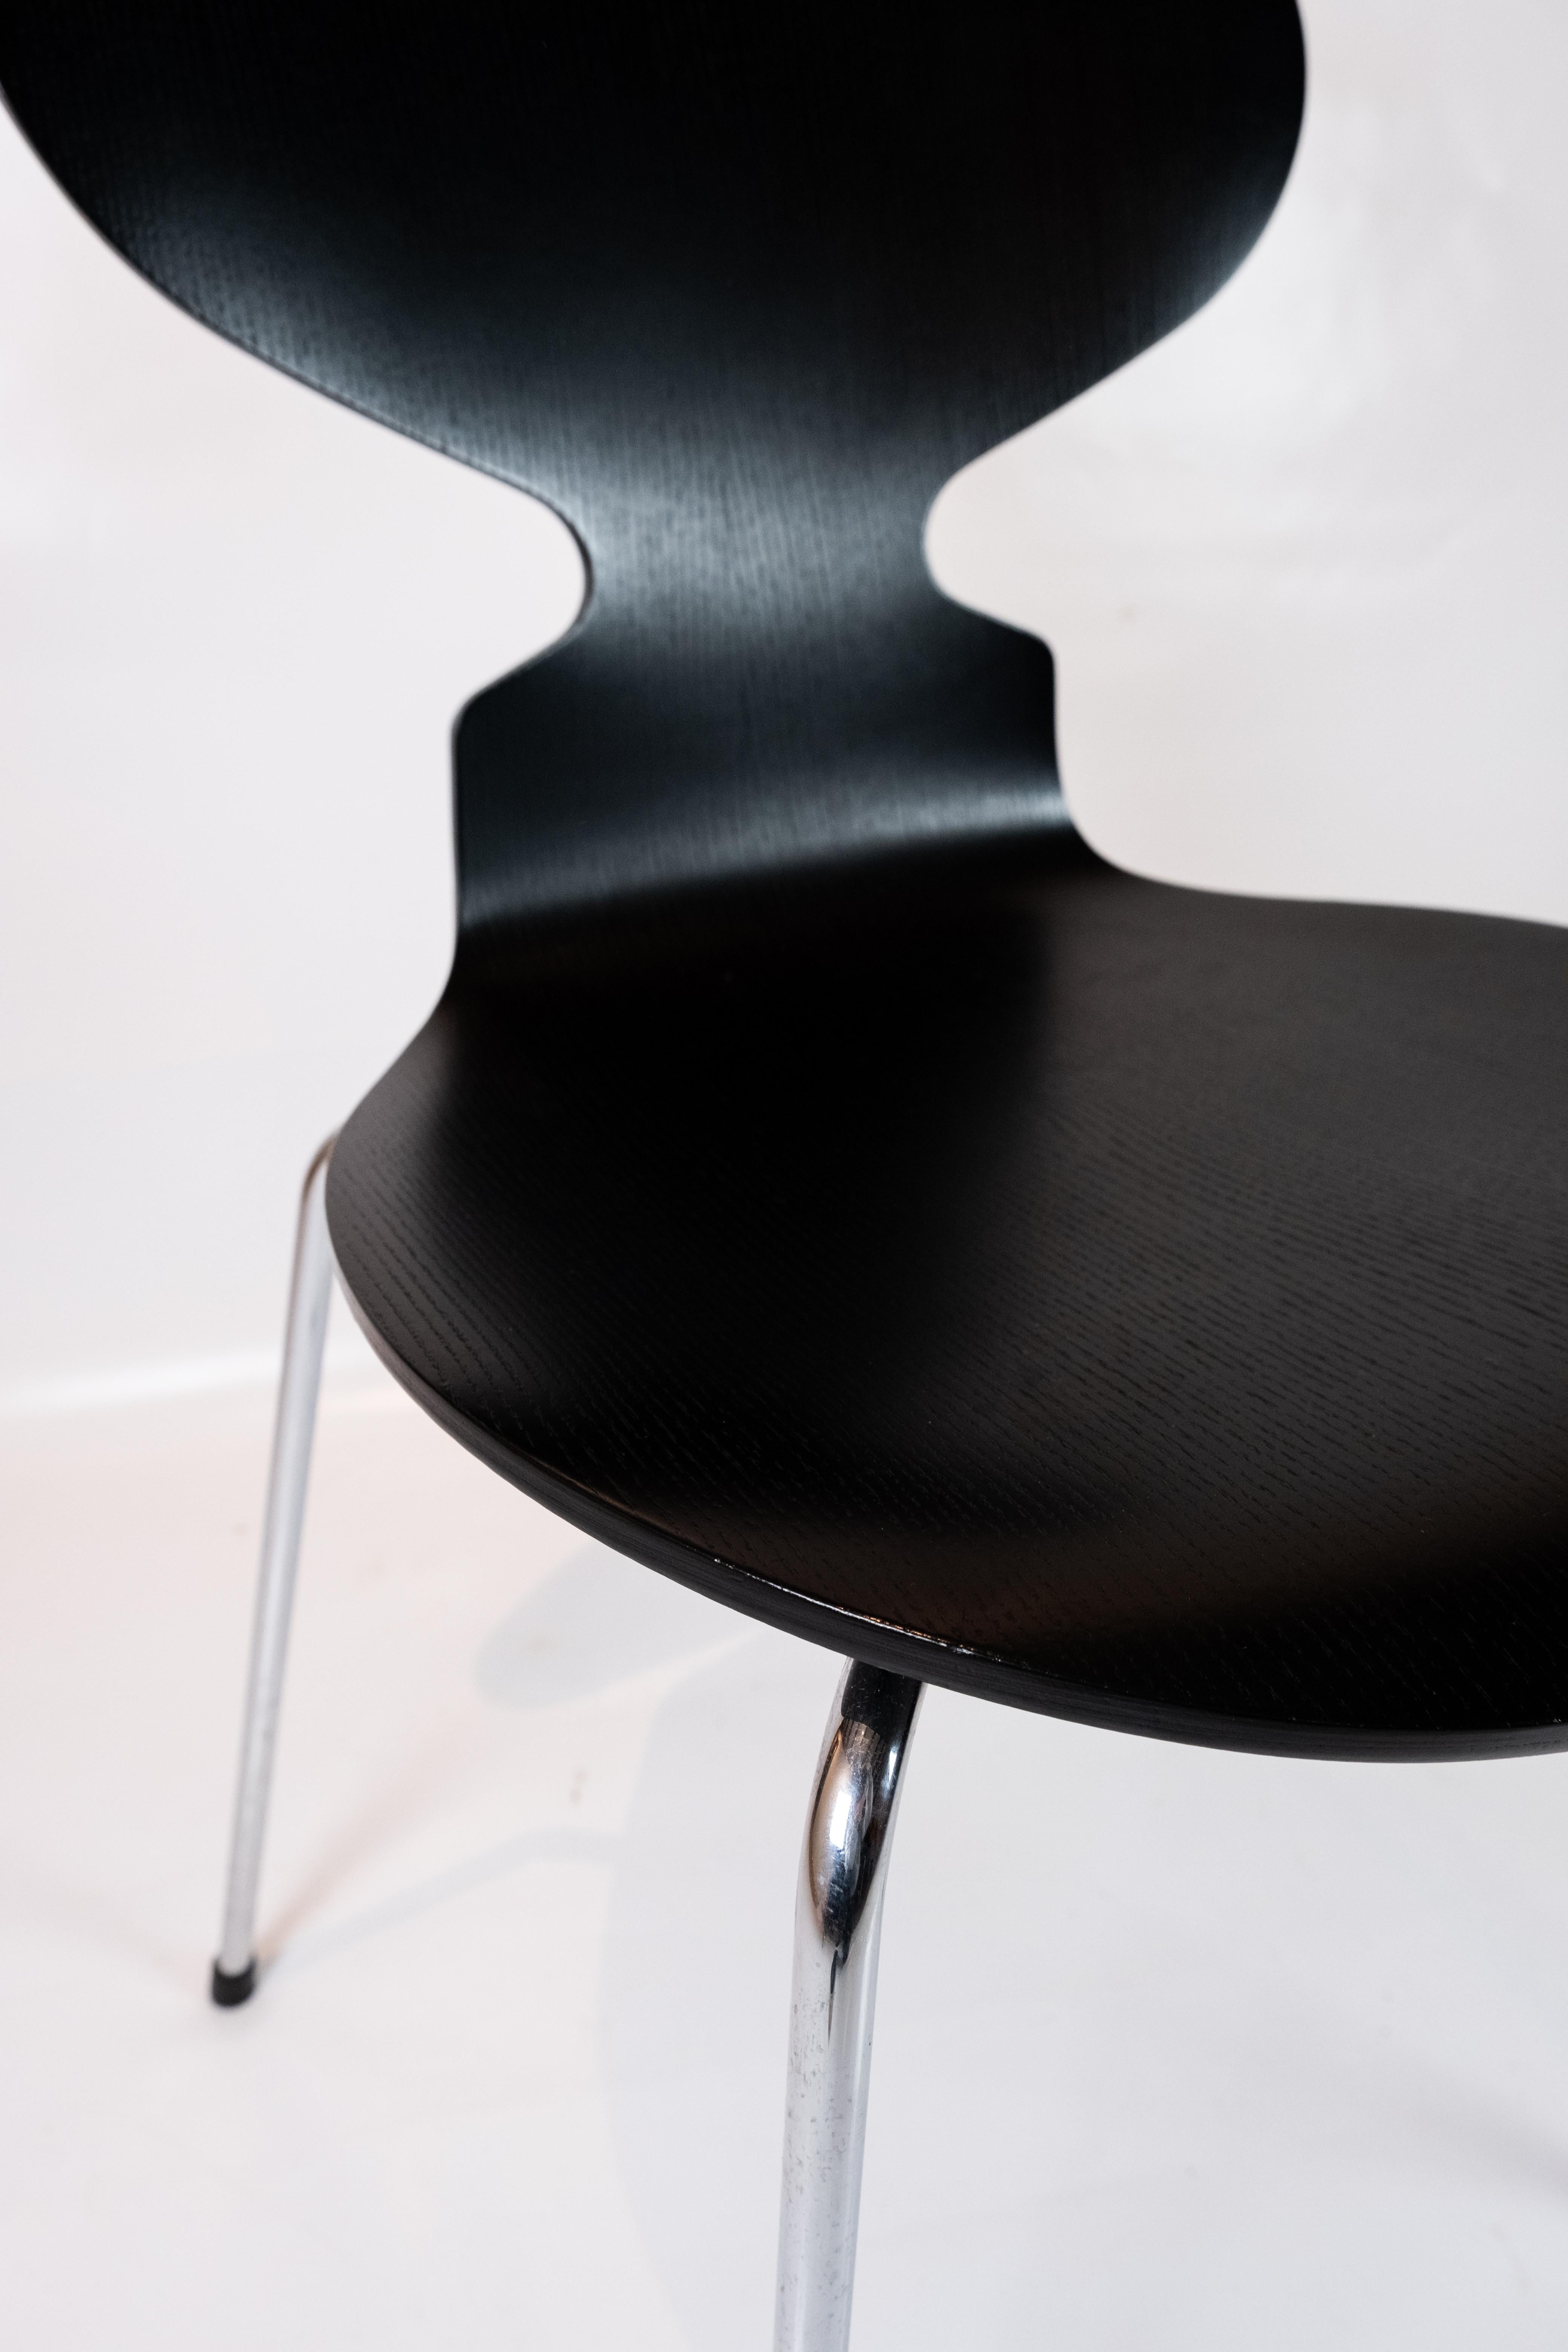 Lacquered Set of Four Black Ant Chairs, Model 3101, Designed by Arne Jacobsen in 1952 For Sale